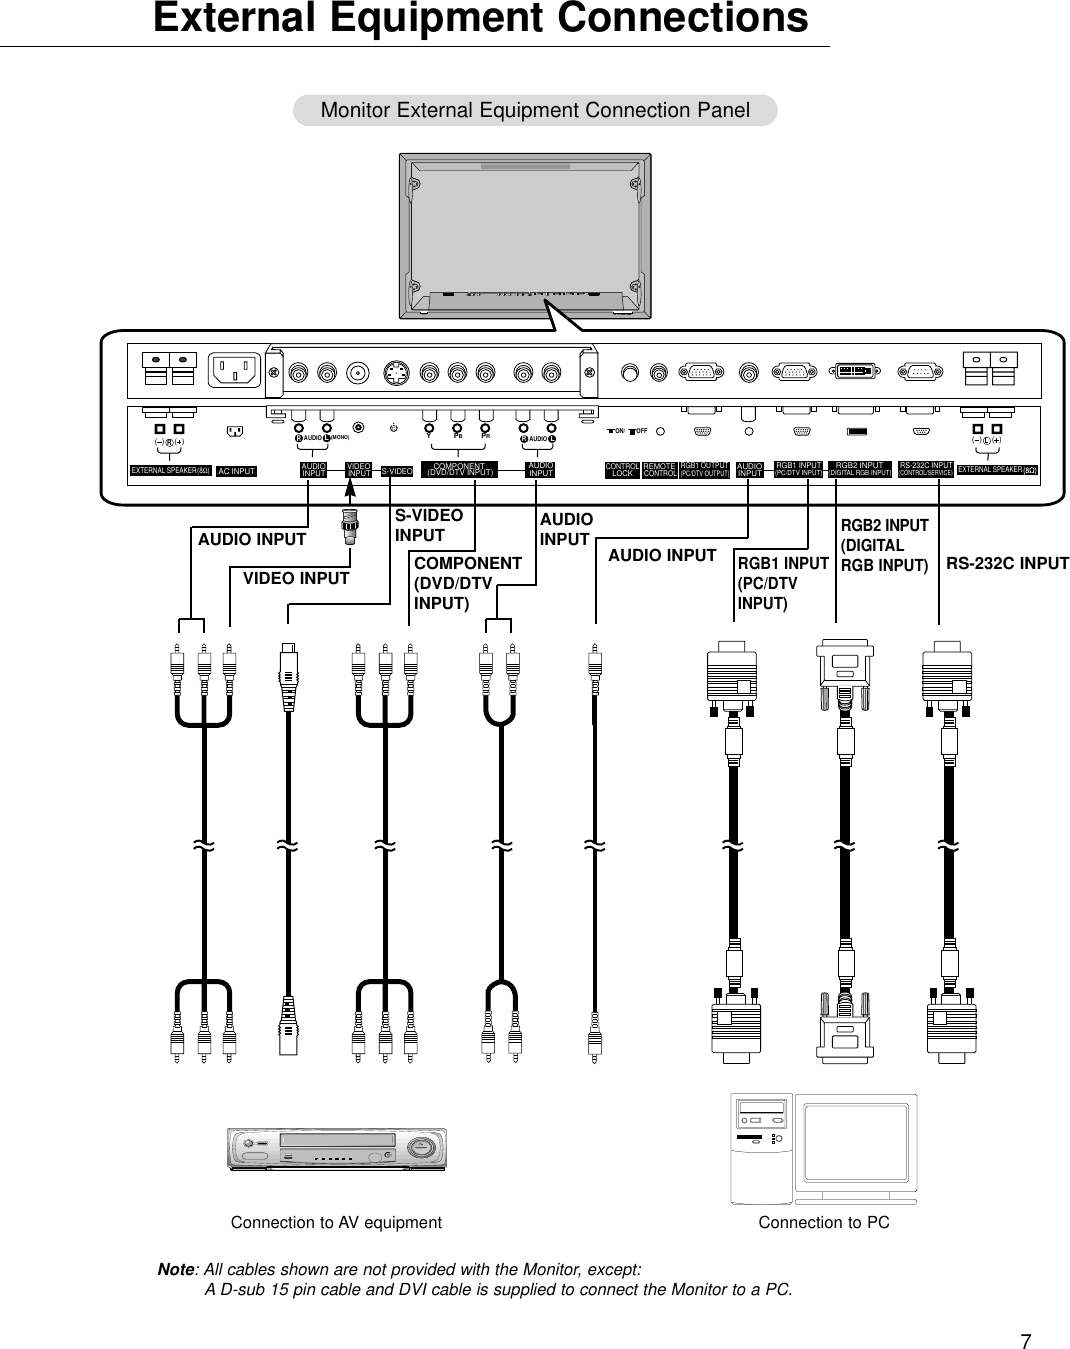 7External Equipment ConnectionsConnection to PCNote: All cables shown are not provided with the Monitor, except:A D-sub 15 pin cable and DVI cable is supplied to connect the Monitor to a PC.Connection to AV equipmentYPBPR(  )(  )R(MONO)RAUDIO ON/ OFFLRAUDIOL(  )(  )LAC INPUT(8Ω)EXTERNAL SPEAKERCOMPONENT(DVD/DTV INPUT)RGB1 OUTPUT(PC/DTV OUTPUT)LOCKREMOTECONTROLCONTROLRGB1 INPUT(PC/DTV INPUT)INPUTAUDIOINPUTAUDIOINPUTAUDIO INPUTVIDEORGB2 INPUT(DIGITAL RGB INPUT) RS-232C INPUT(CONTROL/SERVICE)S-VIDEOEXTERNAL SPEAKERAUDIO INPUTVIDEO INPUT COMPONENT(DVD/DTVINPUT)S-VIDEOINPUT AUDIOINPUT AUDIO INPUTRGB1 INPUT(PC/DTV INPUT)RGB2 INPUT(DIGITALRGB INPUT)RS-232C INPUTMonitor External Equipment Connection Panel